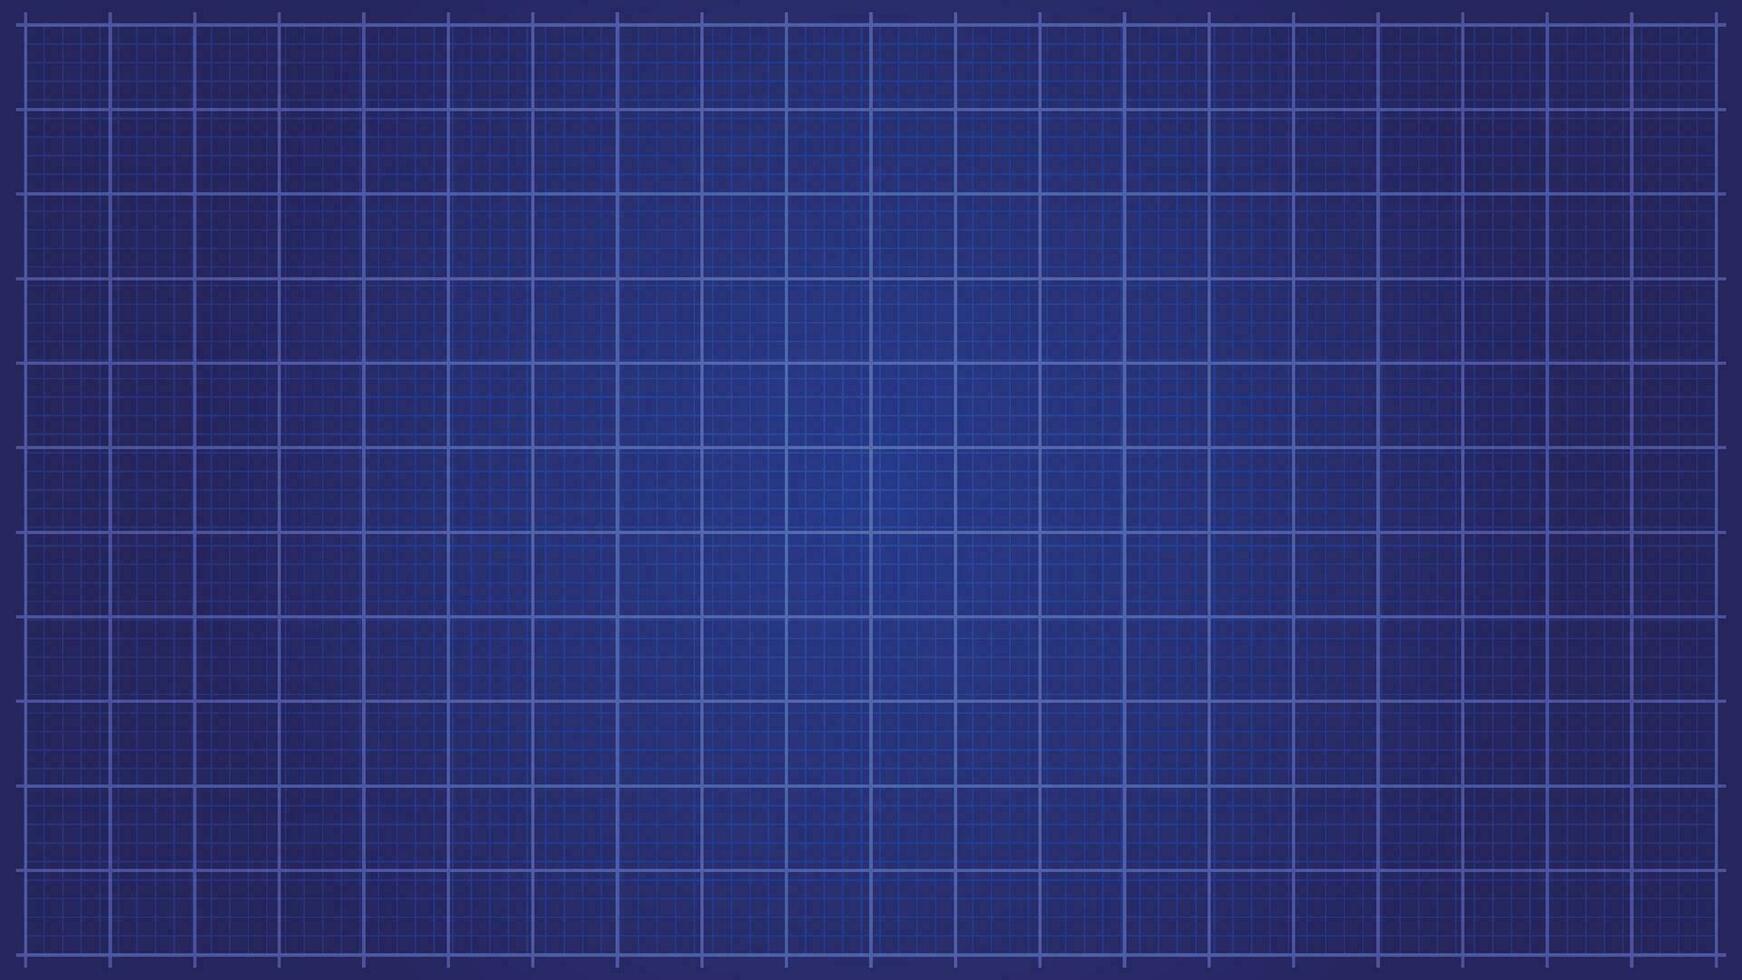 Blueprint Background for Architect Drawing Building Plans on blue paper vector